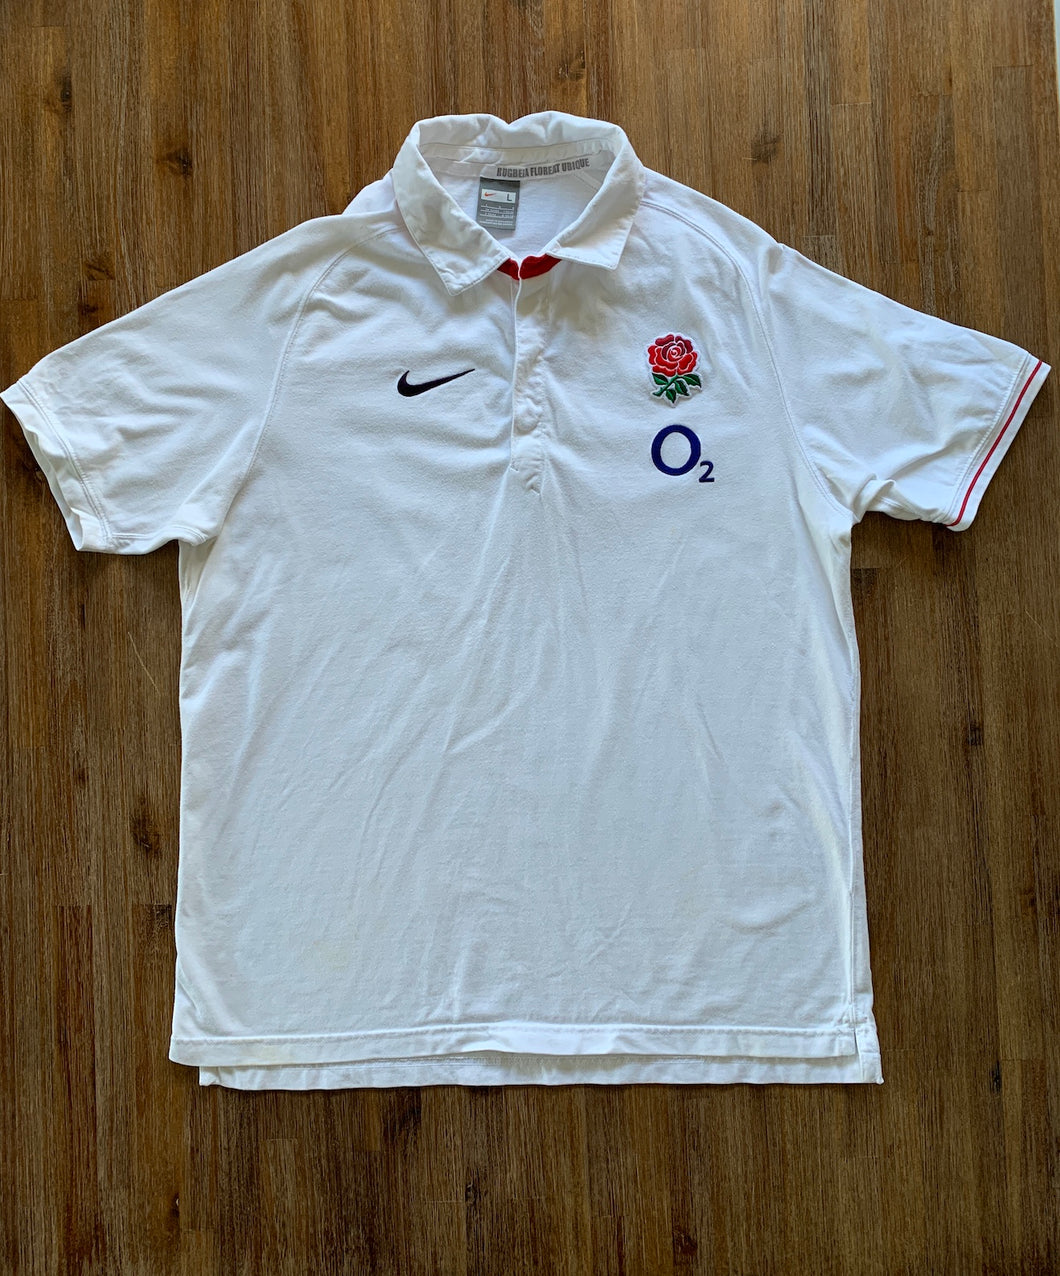 NIKE Size L Vintage England Rugby Team Polo Shirt in White Mens JAN52